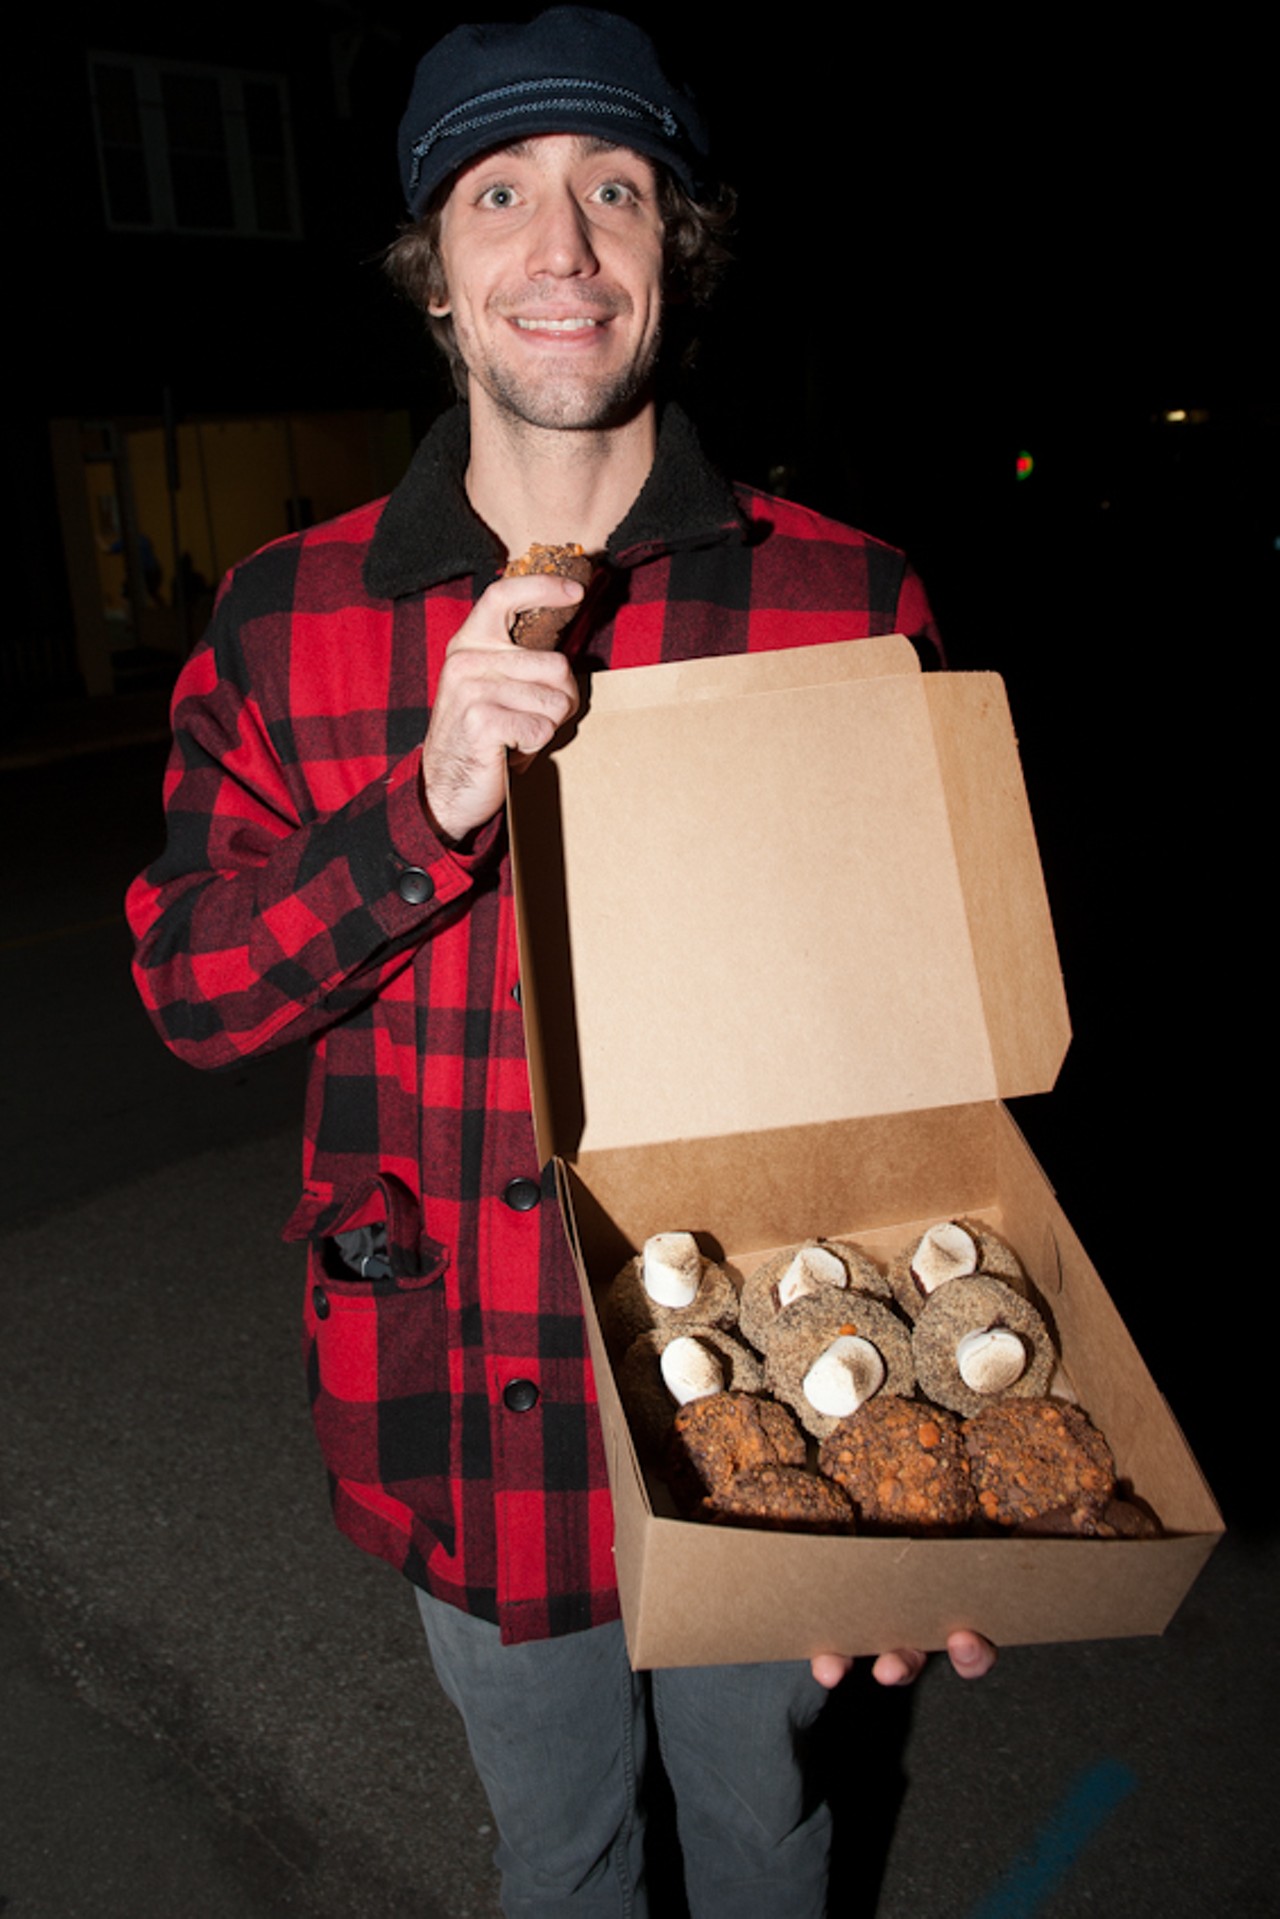 Argus Keppel of St. Louis shows off his purchase of 6 Bart's Revenge and 6 campfire donuts.